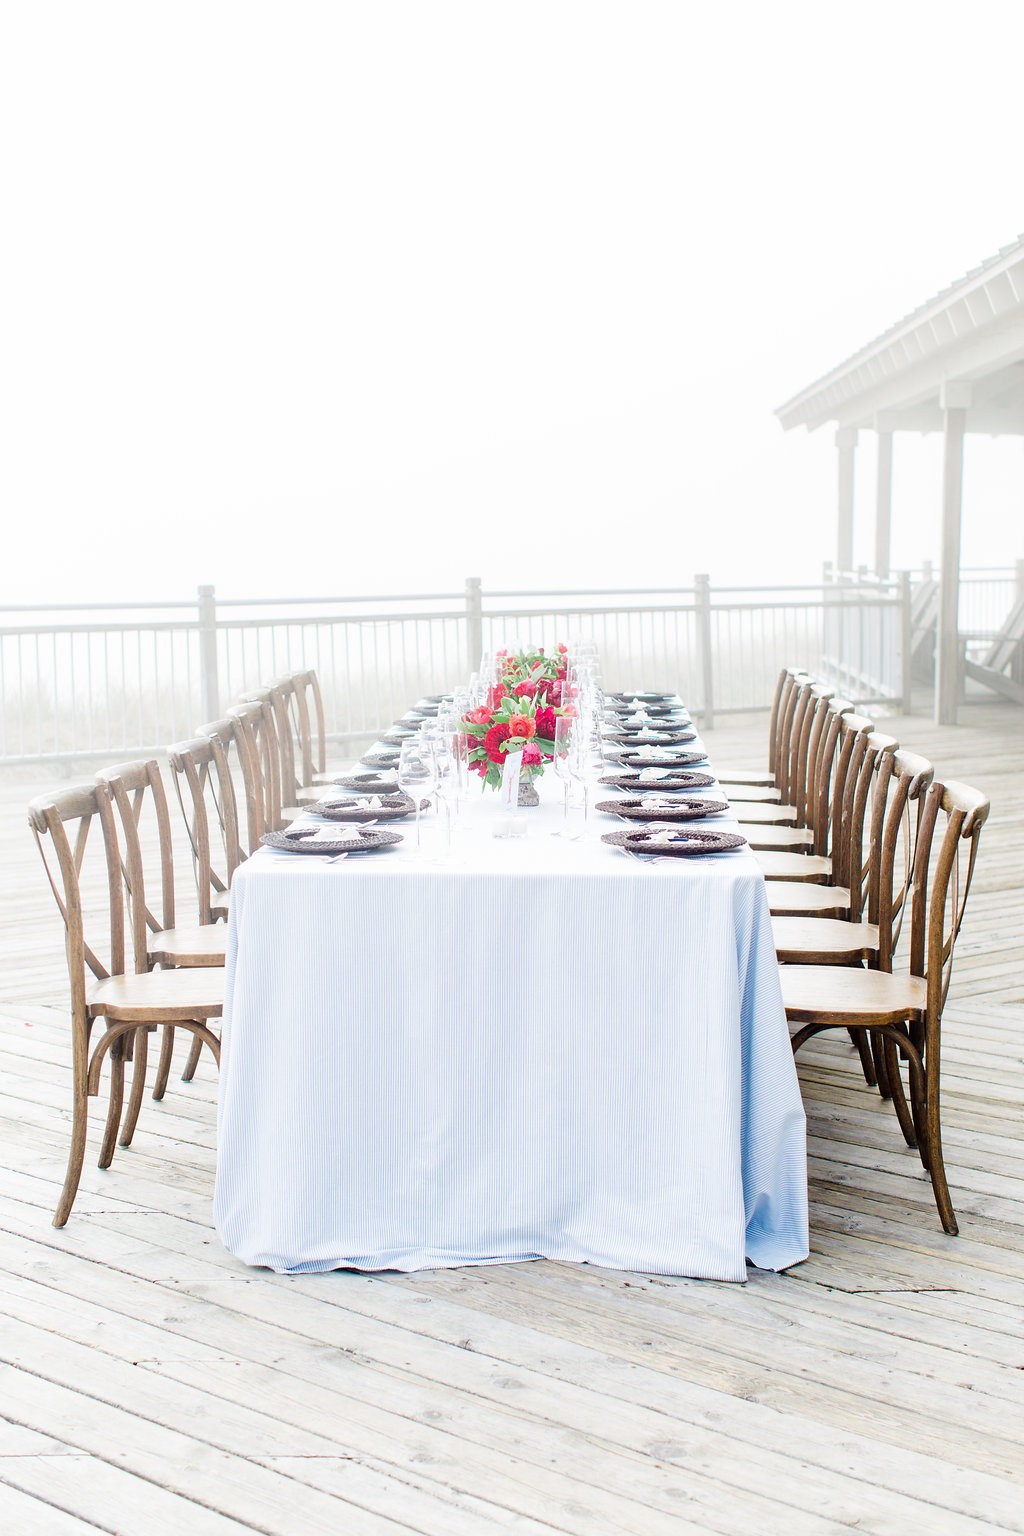 Table set on a deck for a misty lakeside wedding